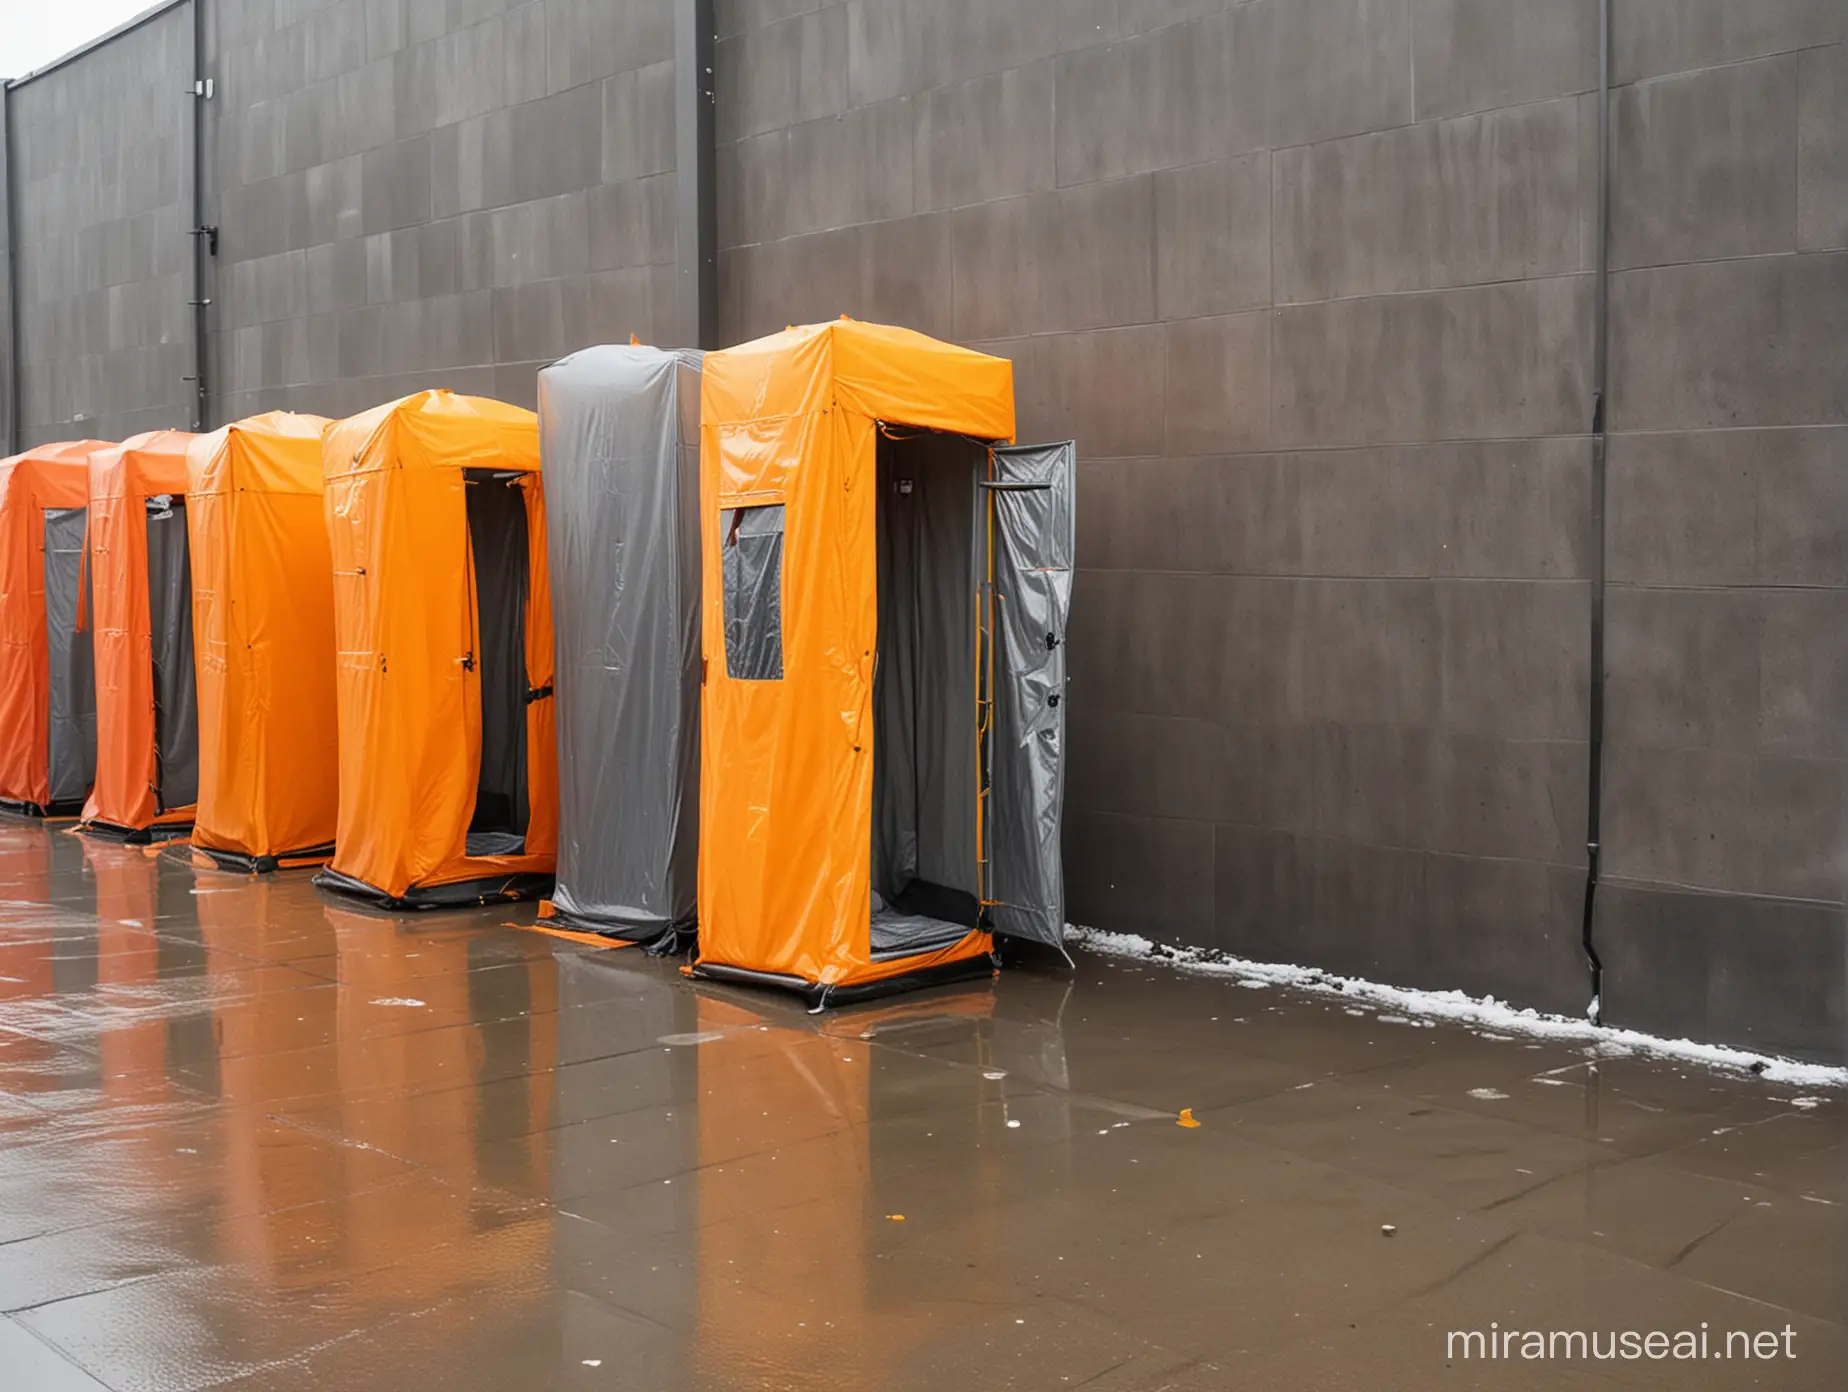 pop up showers colored orange and yellow for the homeless